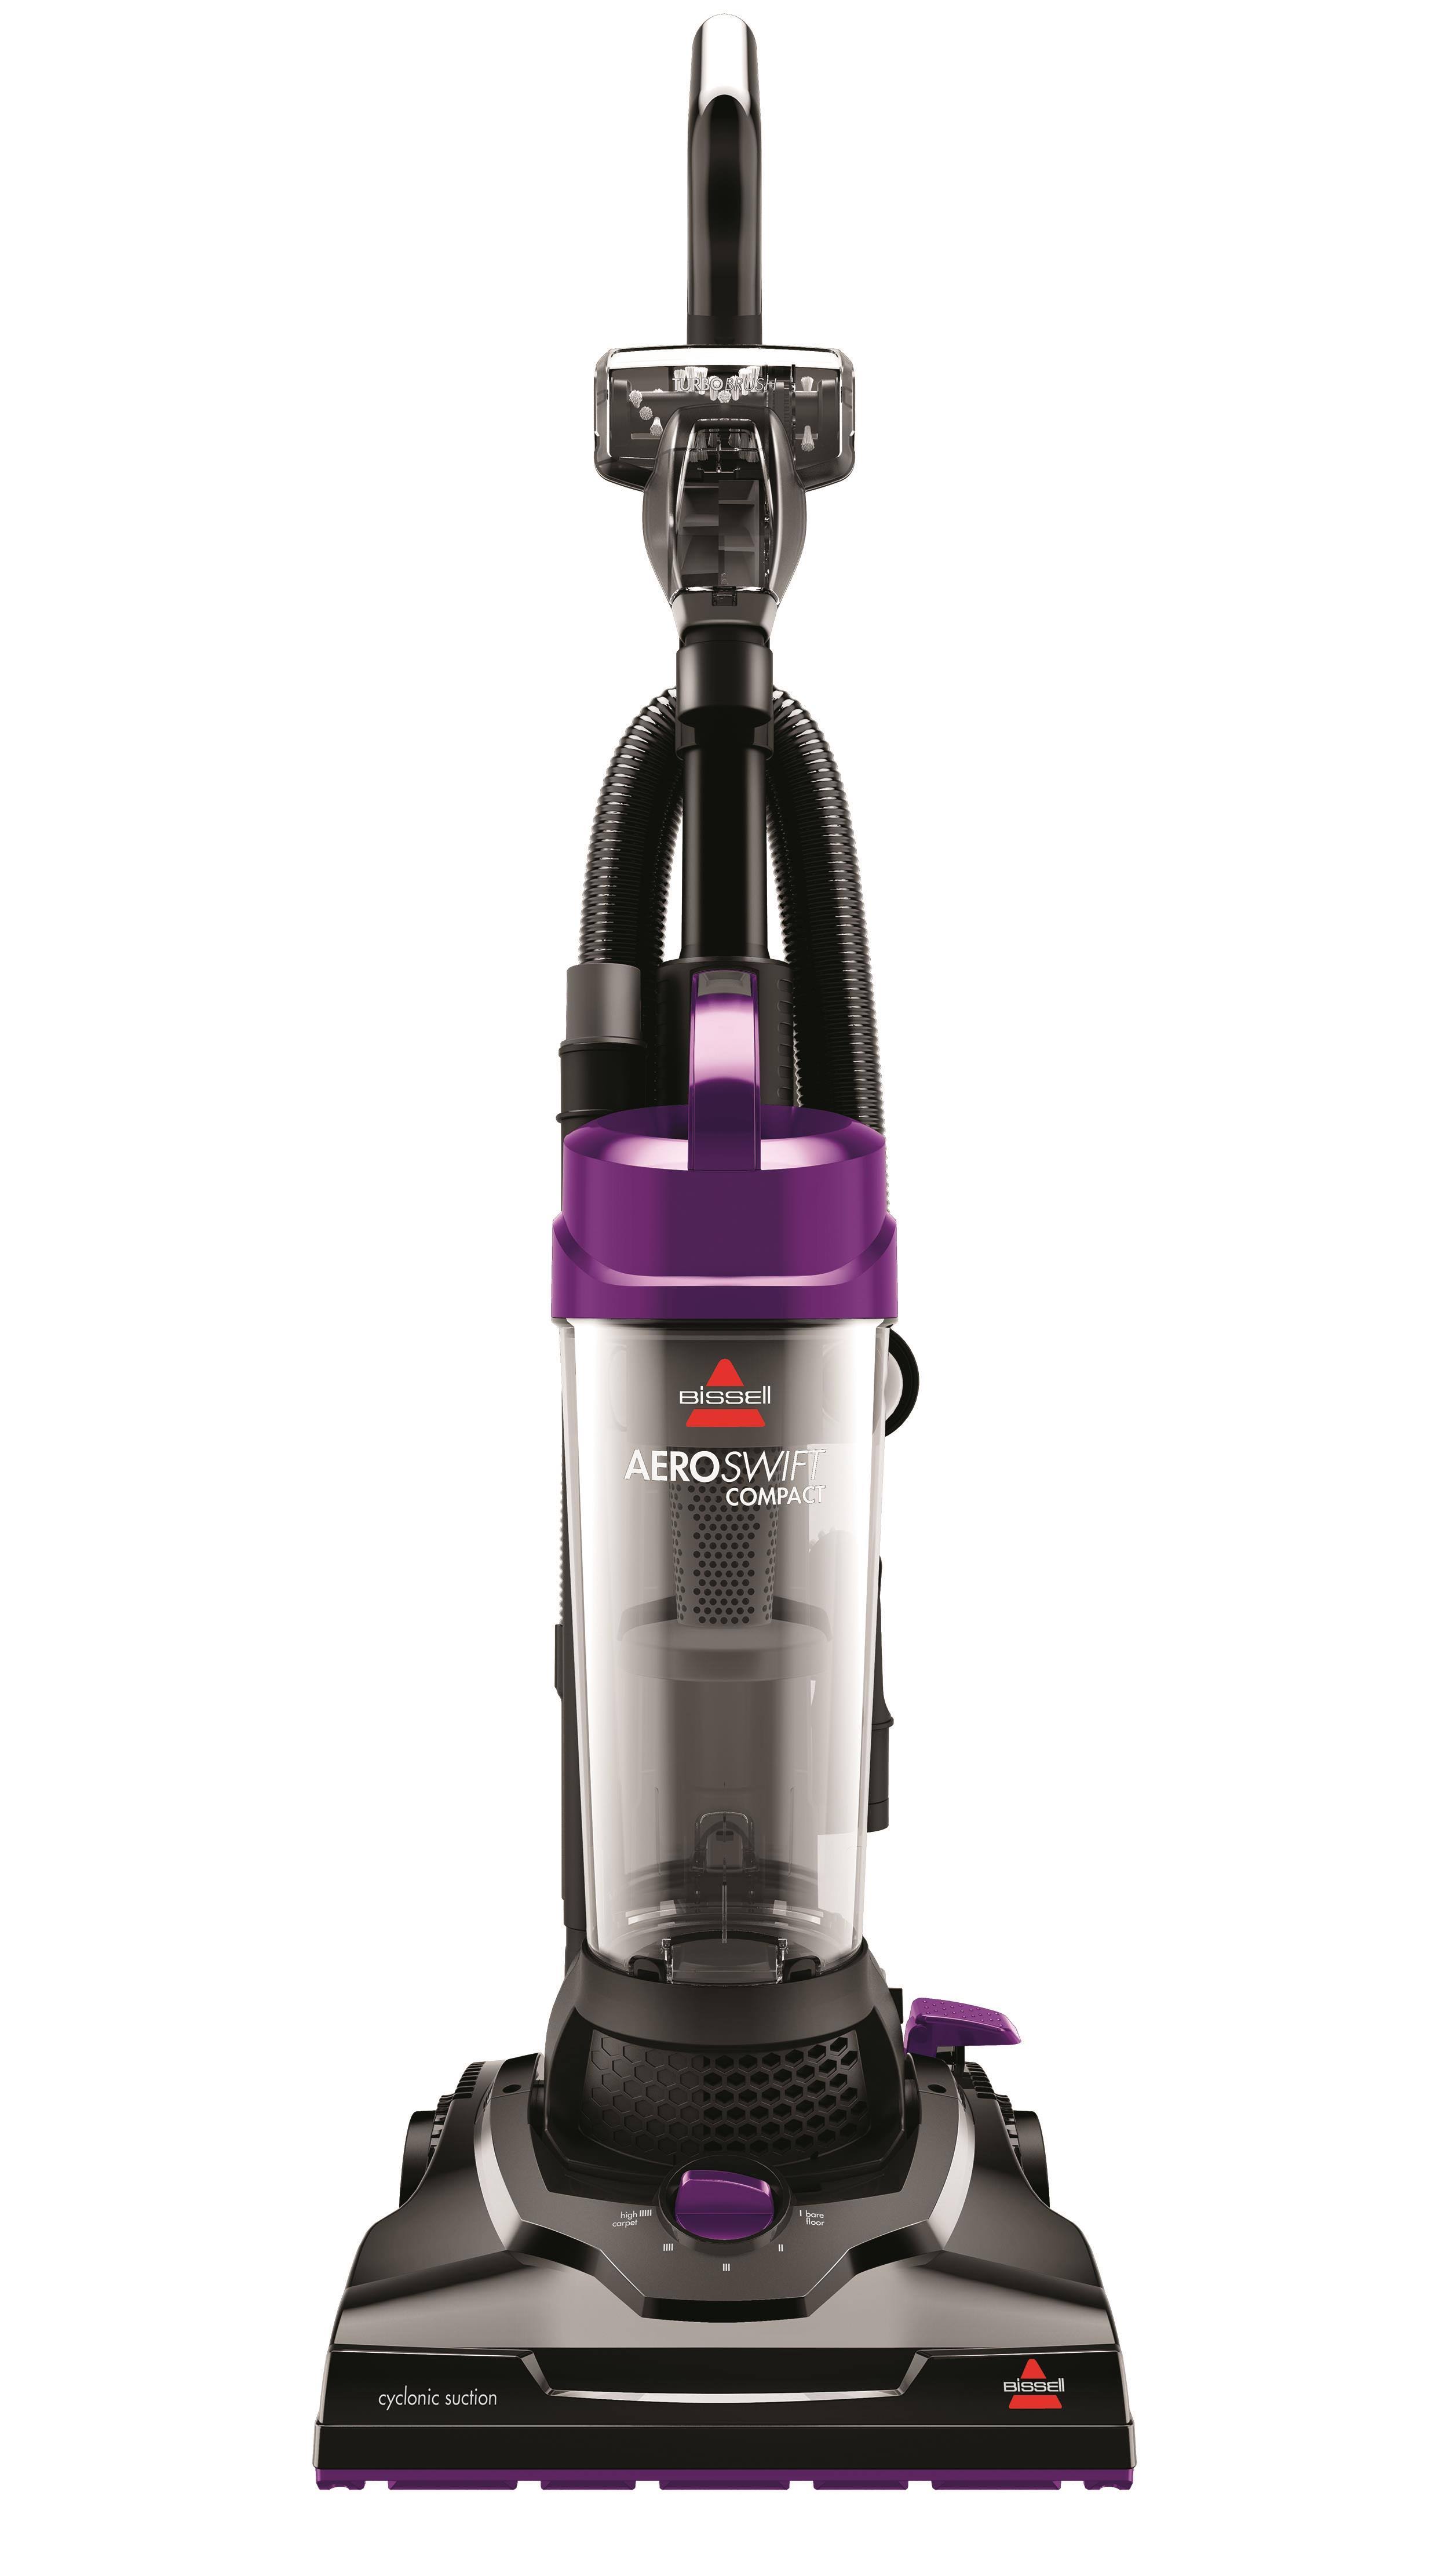 Bissell AeroSwift Compact Lightweight Bagless Upright Vacuum Cleaner 2612